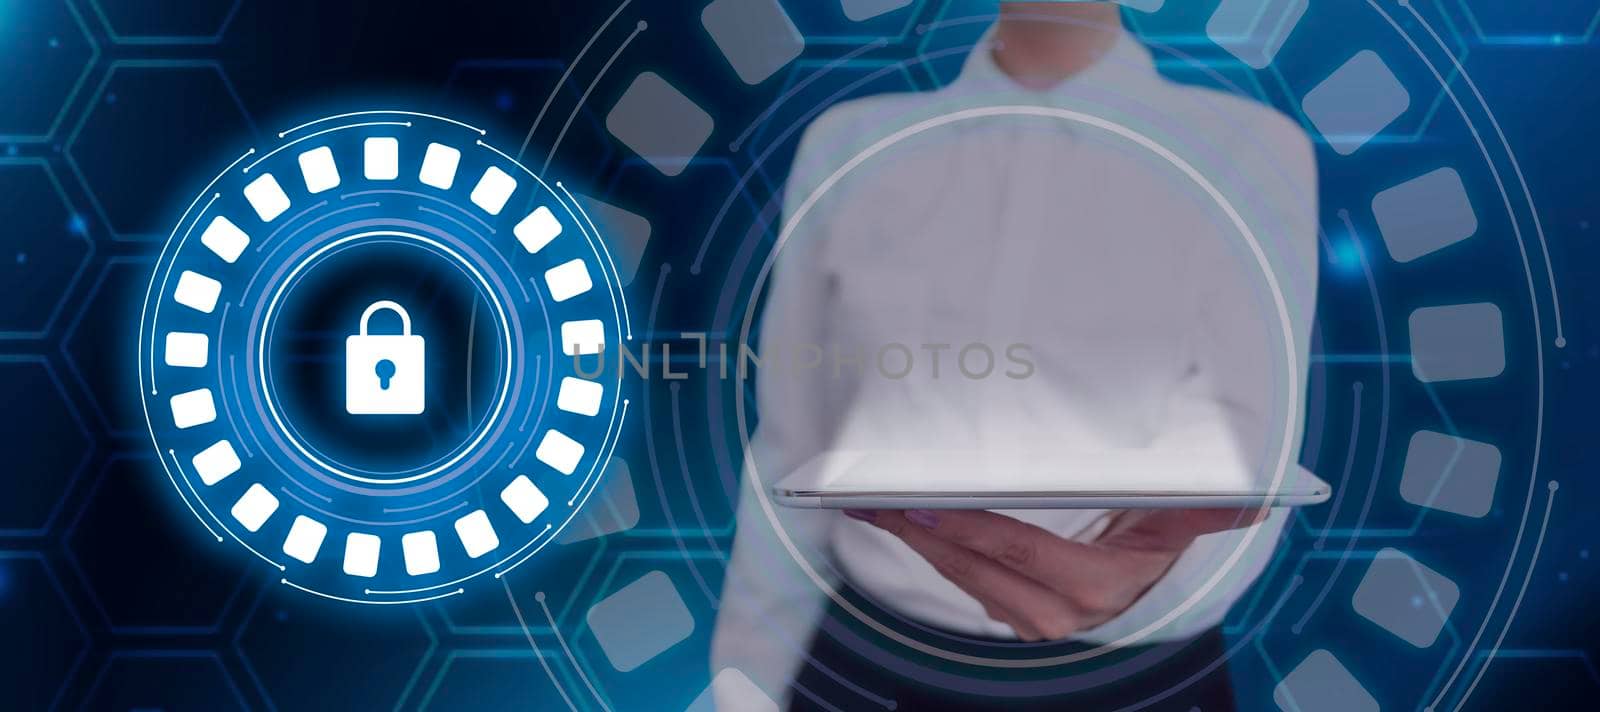 Businesswoman Holding A Tablet Displaying A Digital Lock In A Futuristic Round Design. Woman With A Touch Screen Showing Encrypted Messages In A Secured Connection. by nialowwa